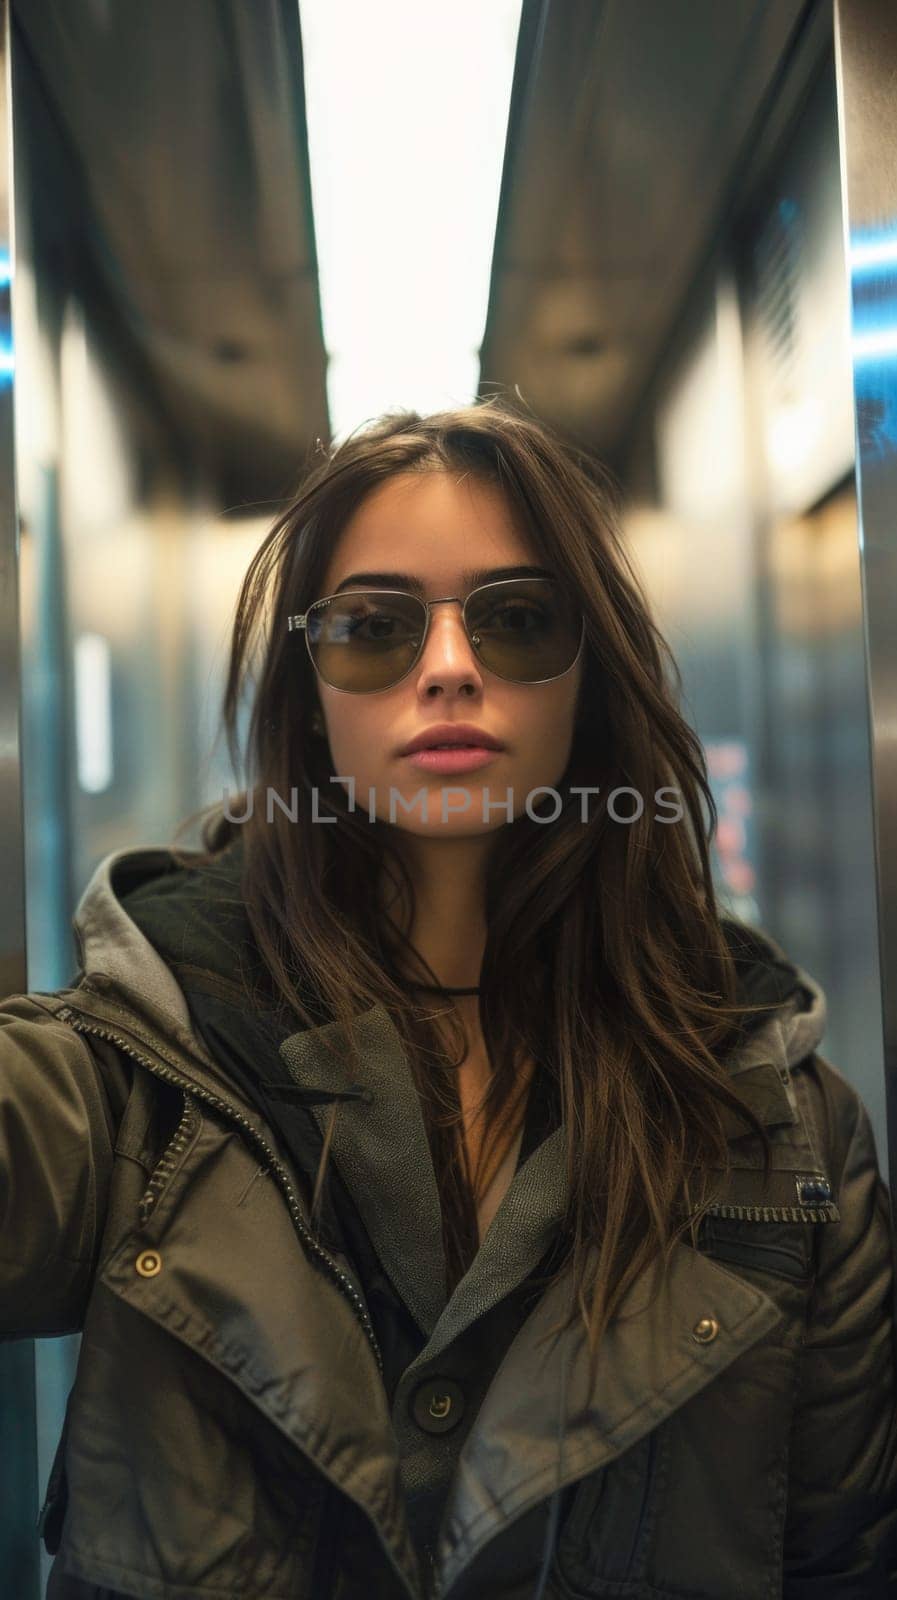 A woman in sunglasses standing on an elevator with a phone